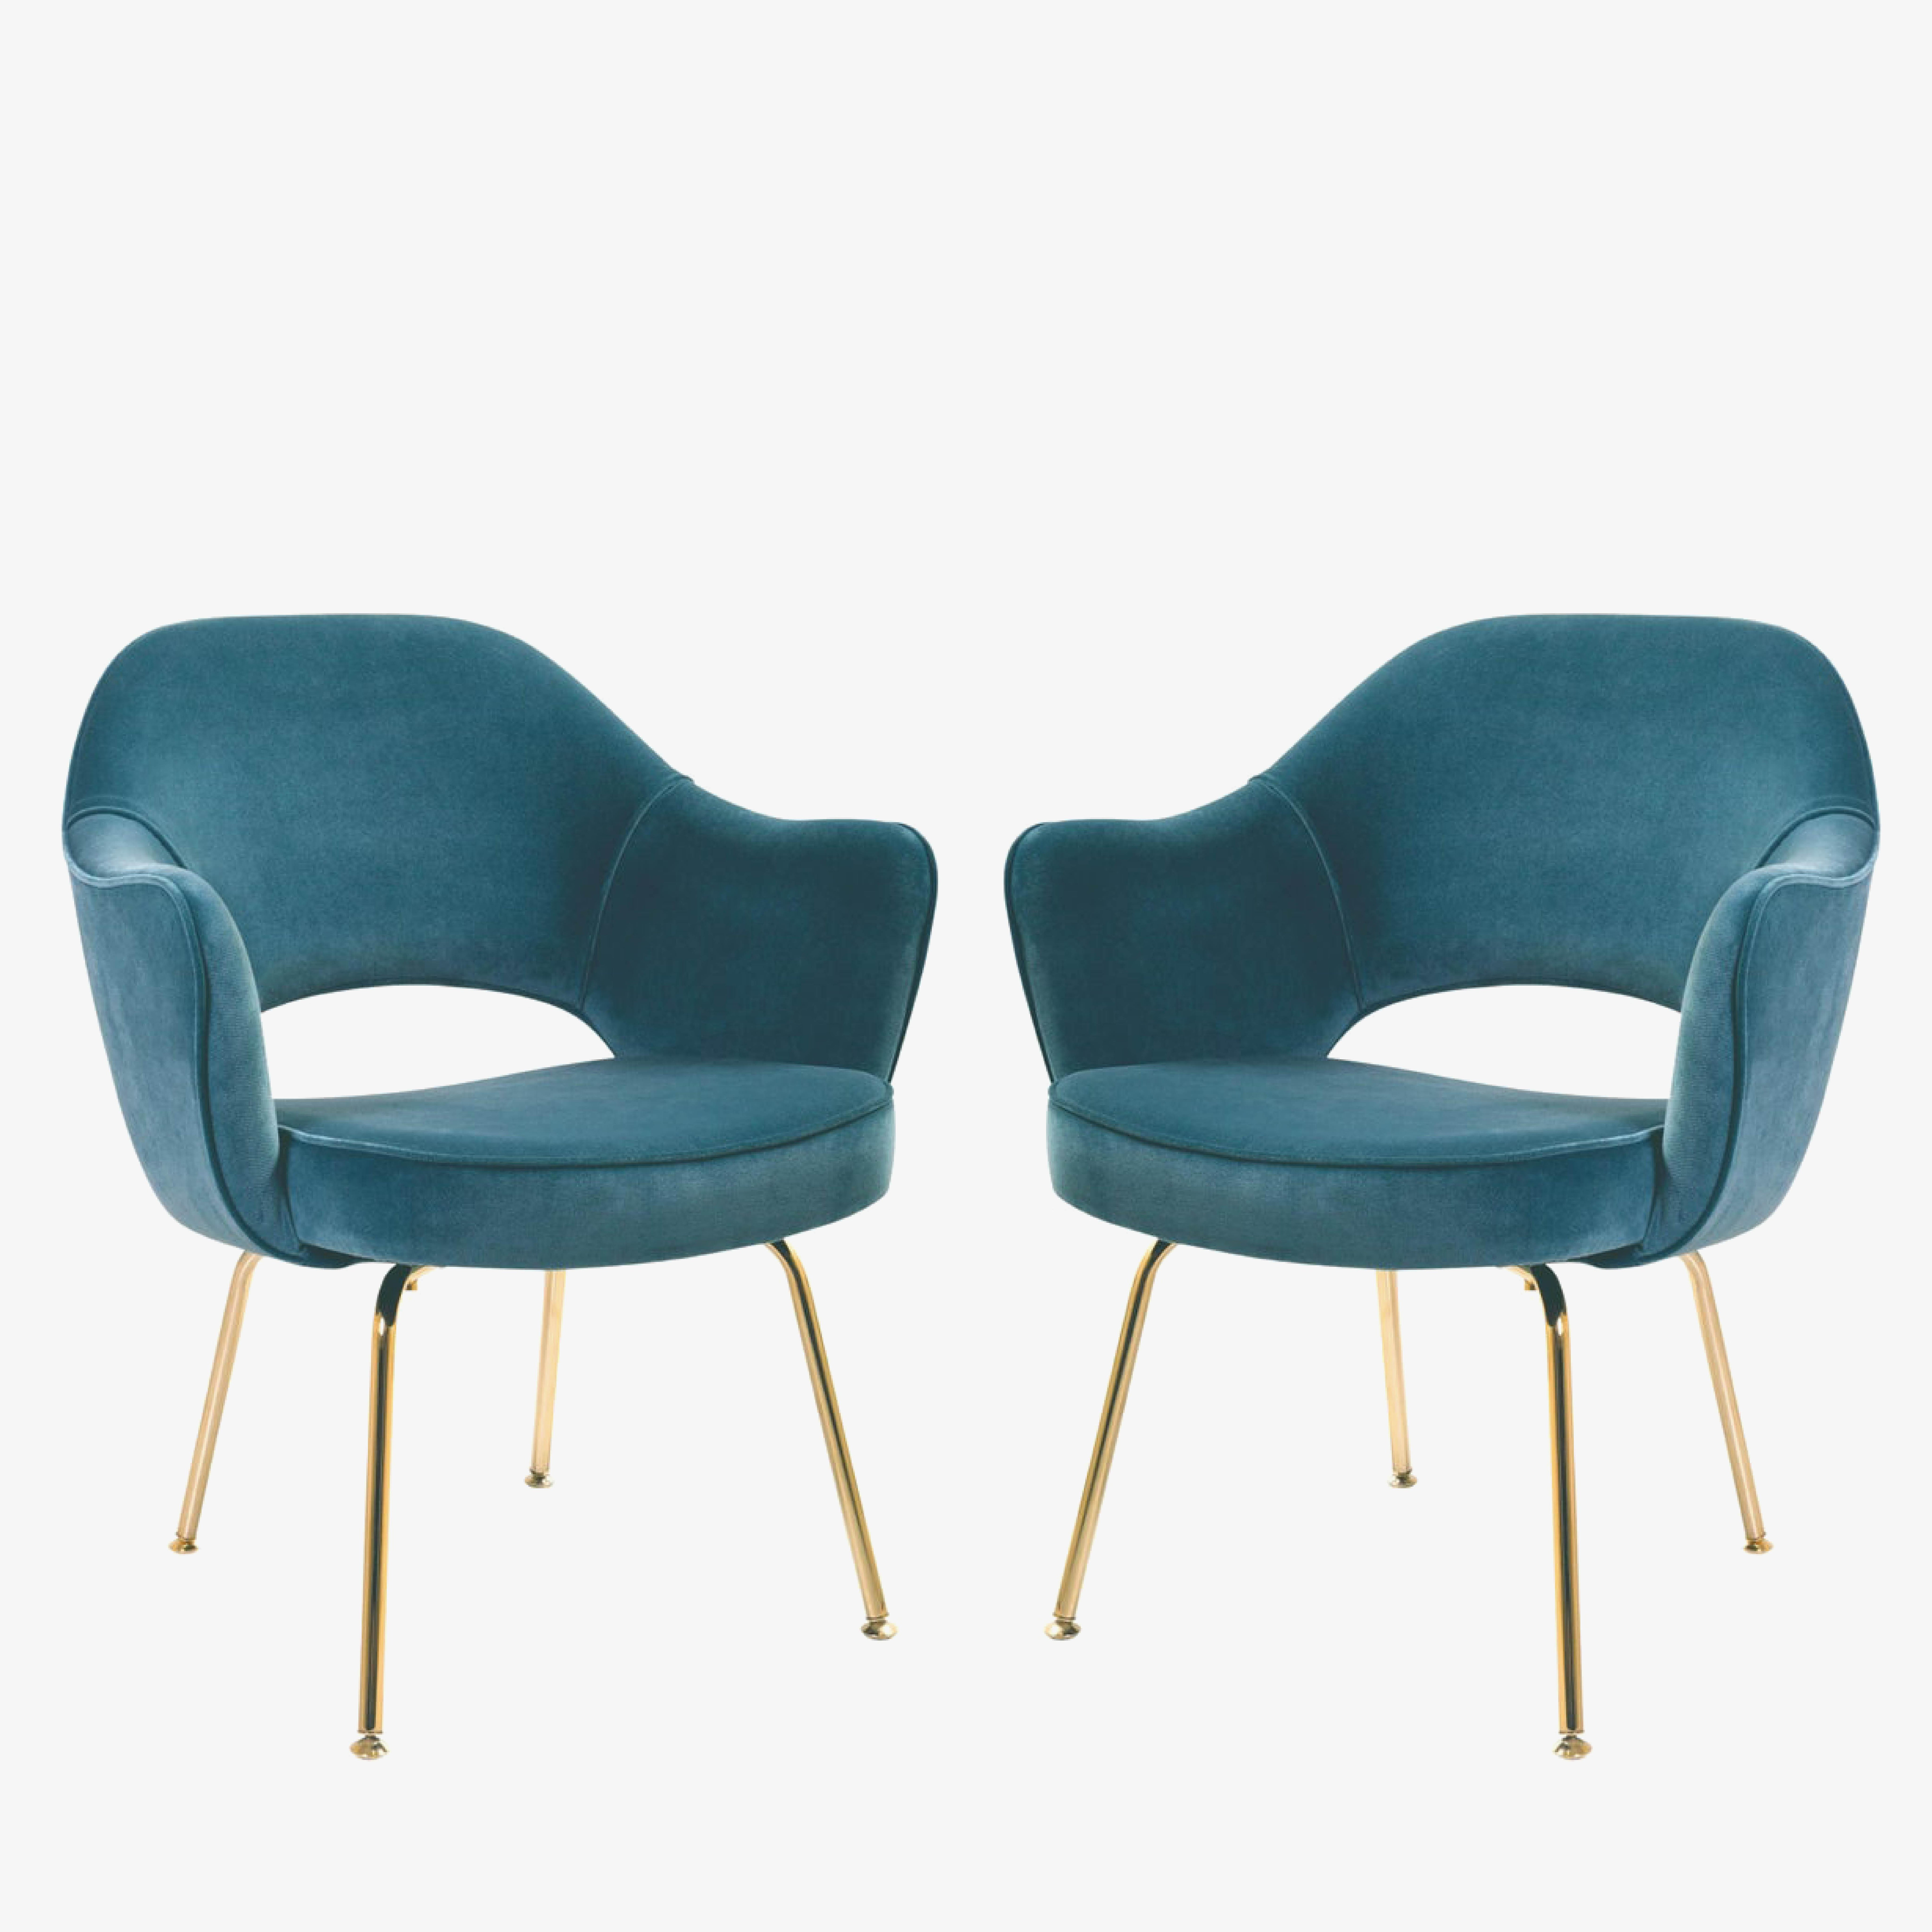 We’ve restored this set of 2 Eero Saarinen for Knoll executive chairs using a 100% Cotton Italian Velvet in the color Pavo blue. Skilled craftsmen have brought each chair back to life to live on for generations to come. All restoration was executed